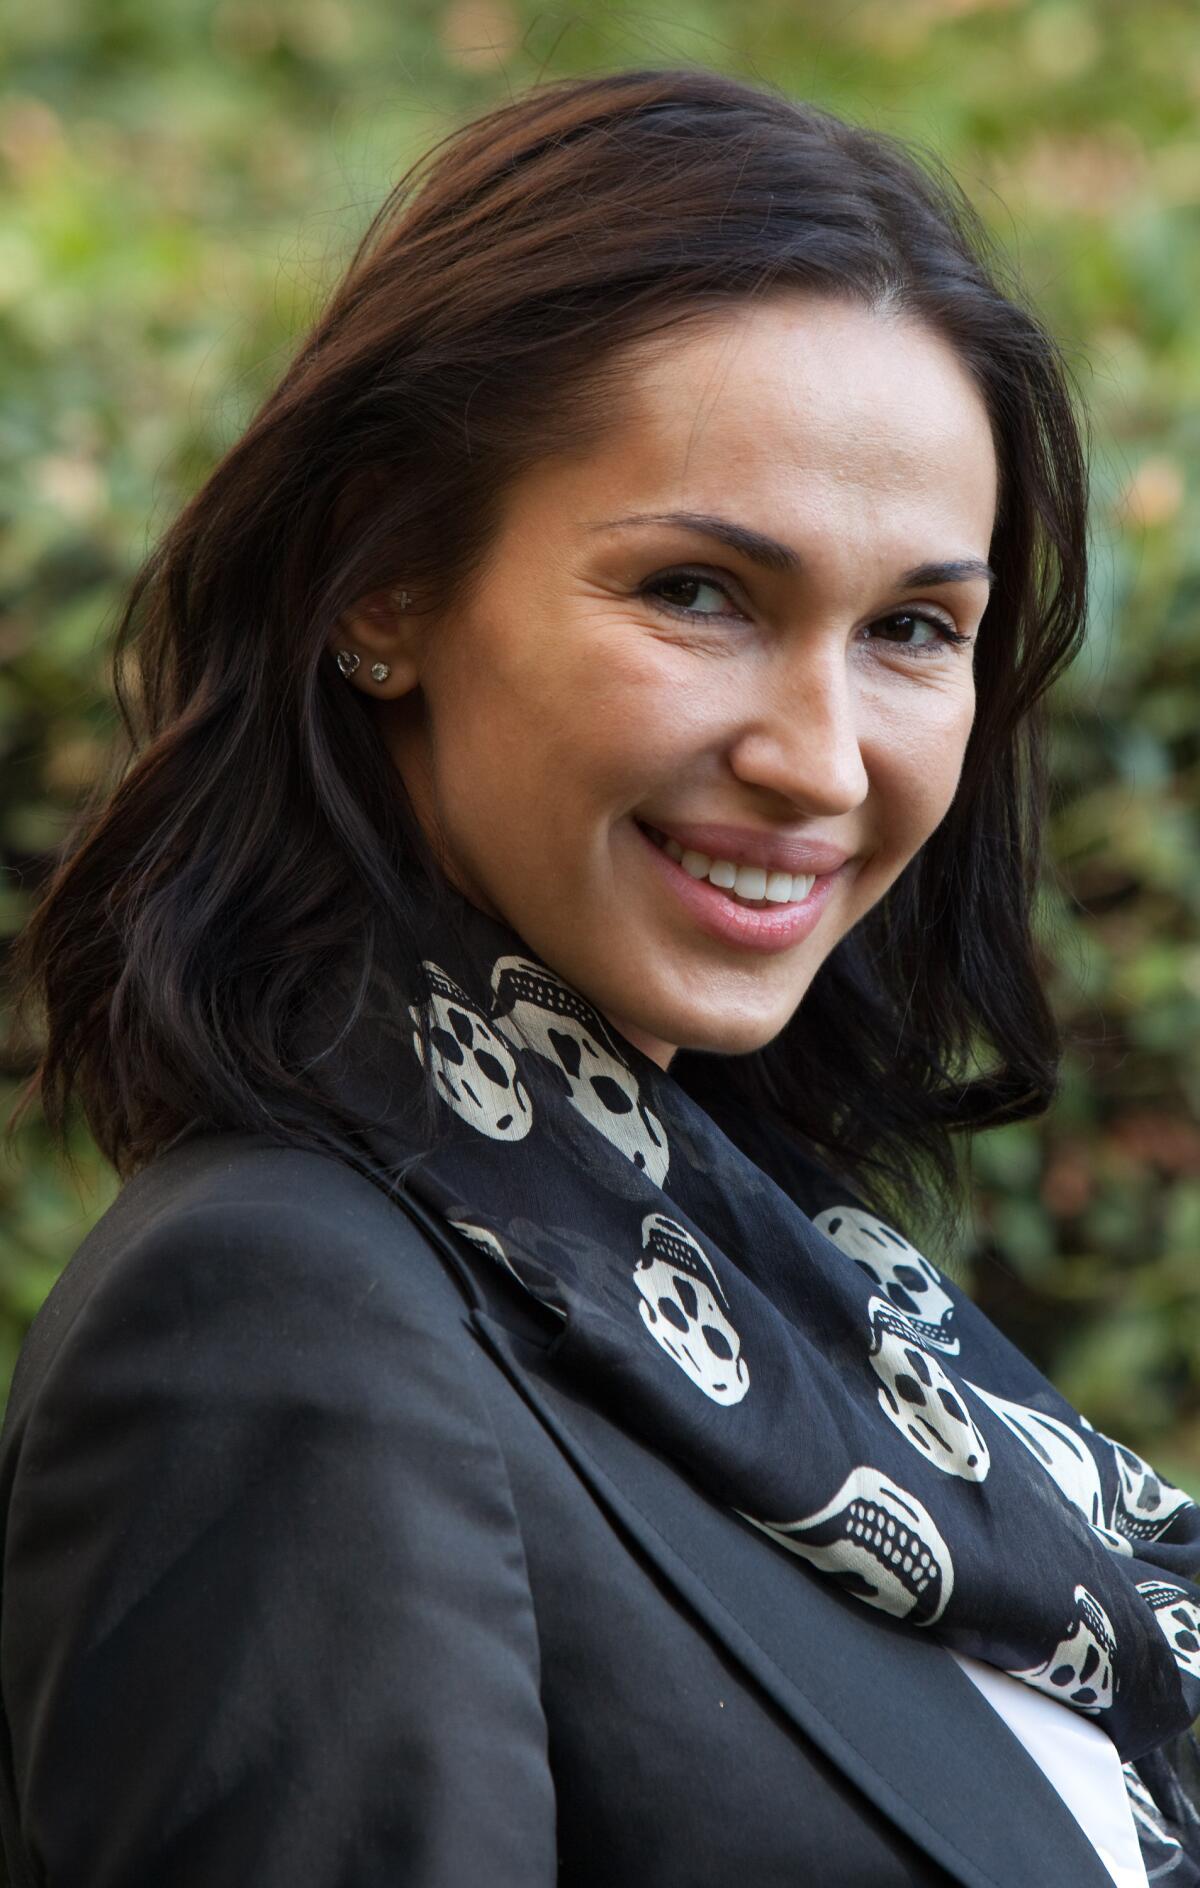 A dark-haired woman in a jacket and scarf emblazoned with skulls smiles with greenery in the background